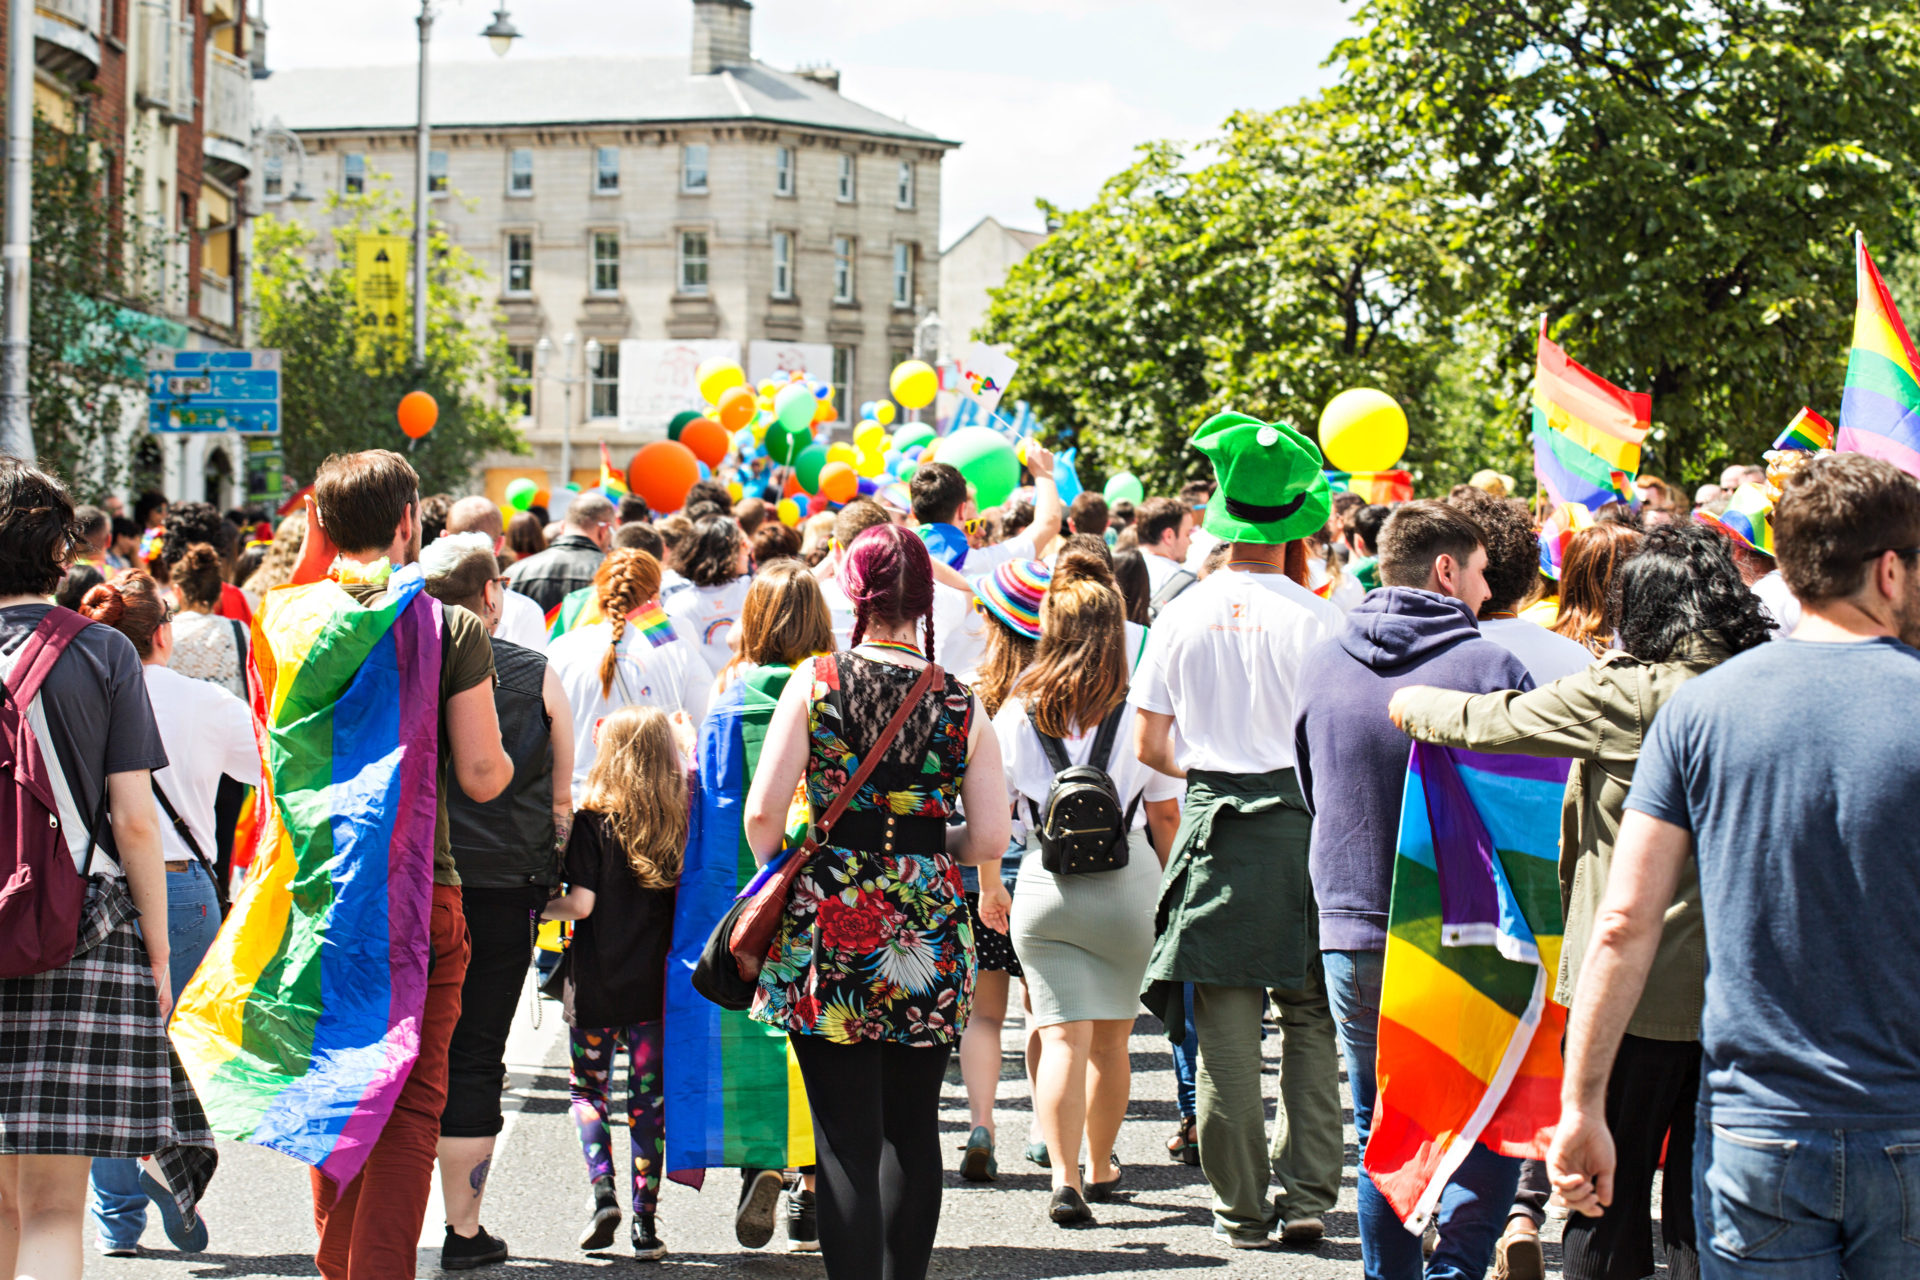 Hate crimes ‘impact the entire community’ – LGBT Ireland